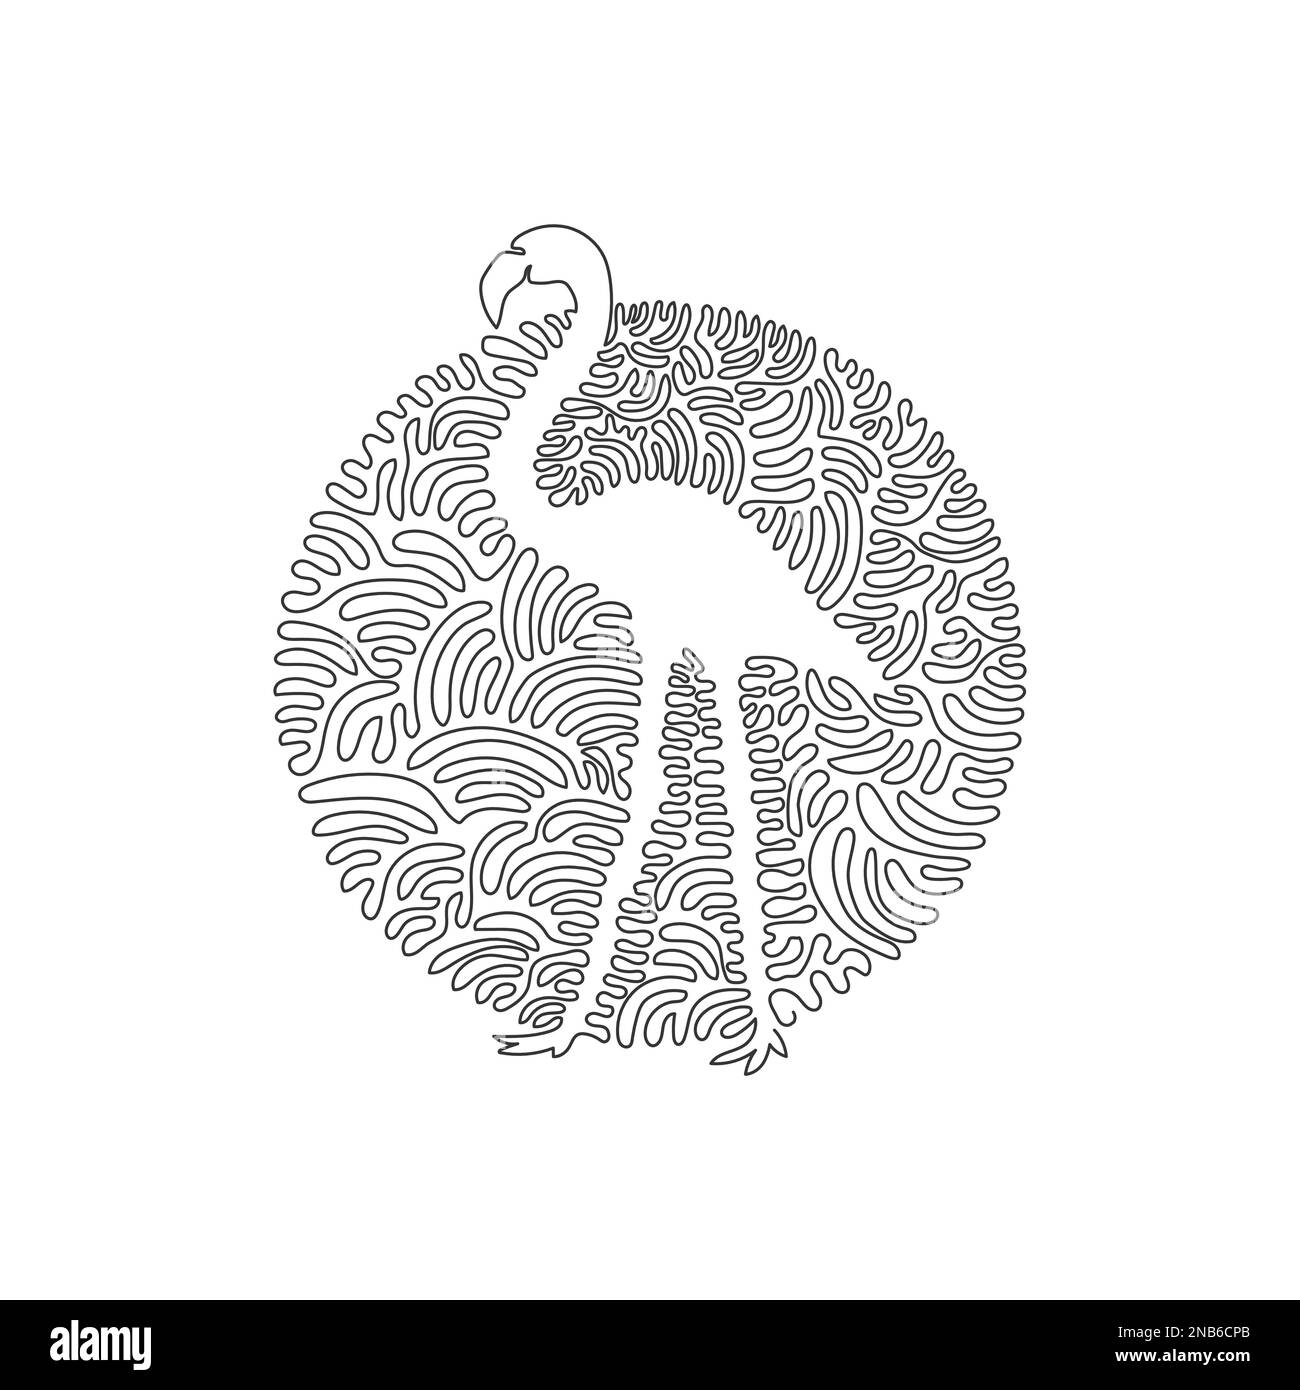 Single one curly line drawing of flamingo with long legs and necks. Continuous line draw graphic design vector illustration of beautiful flamingo Stock Vector